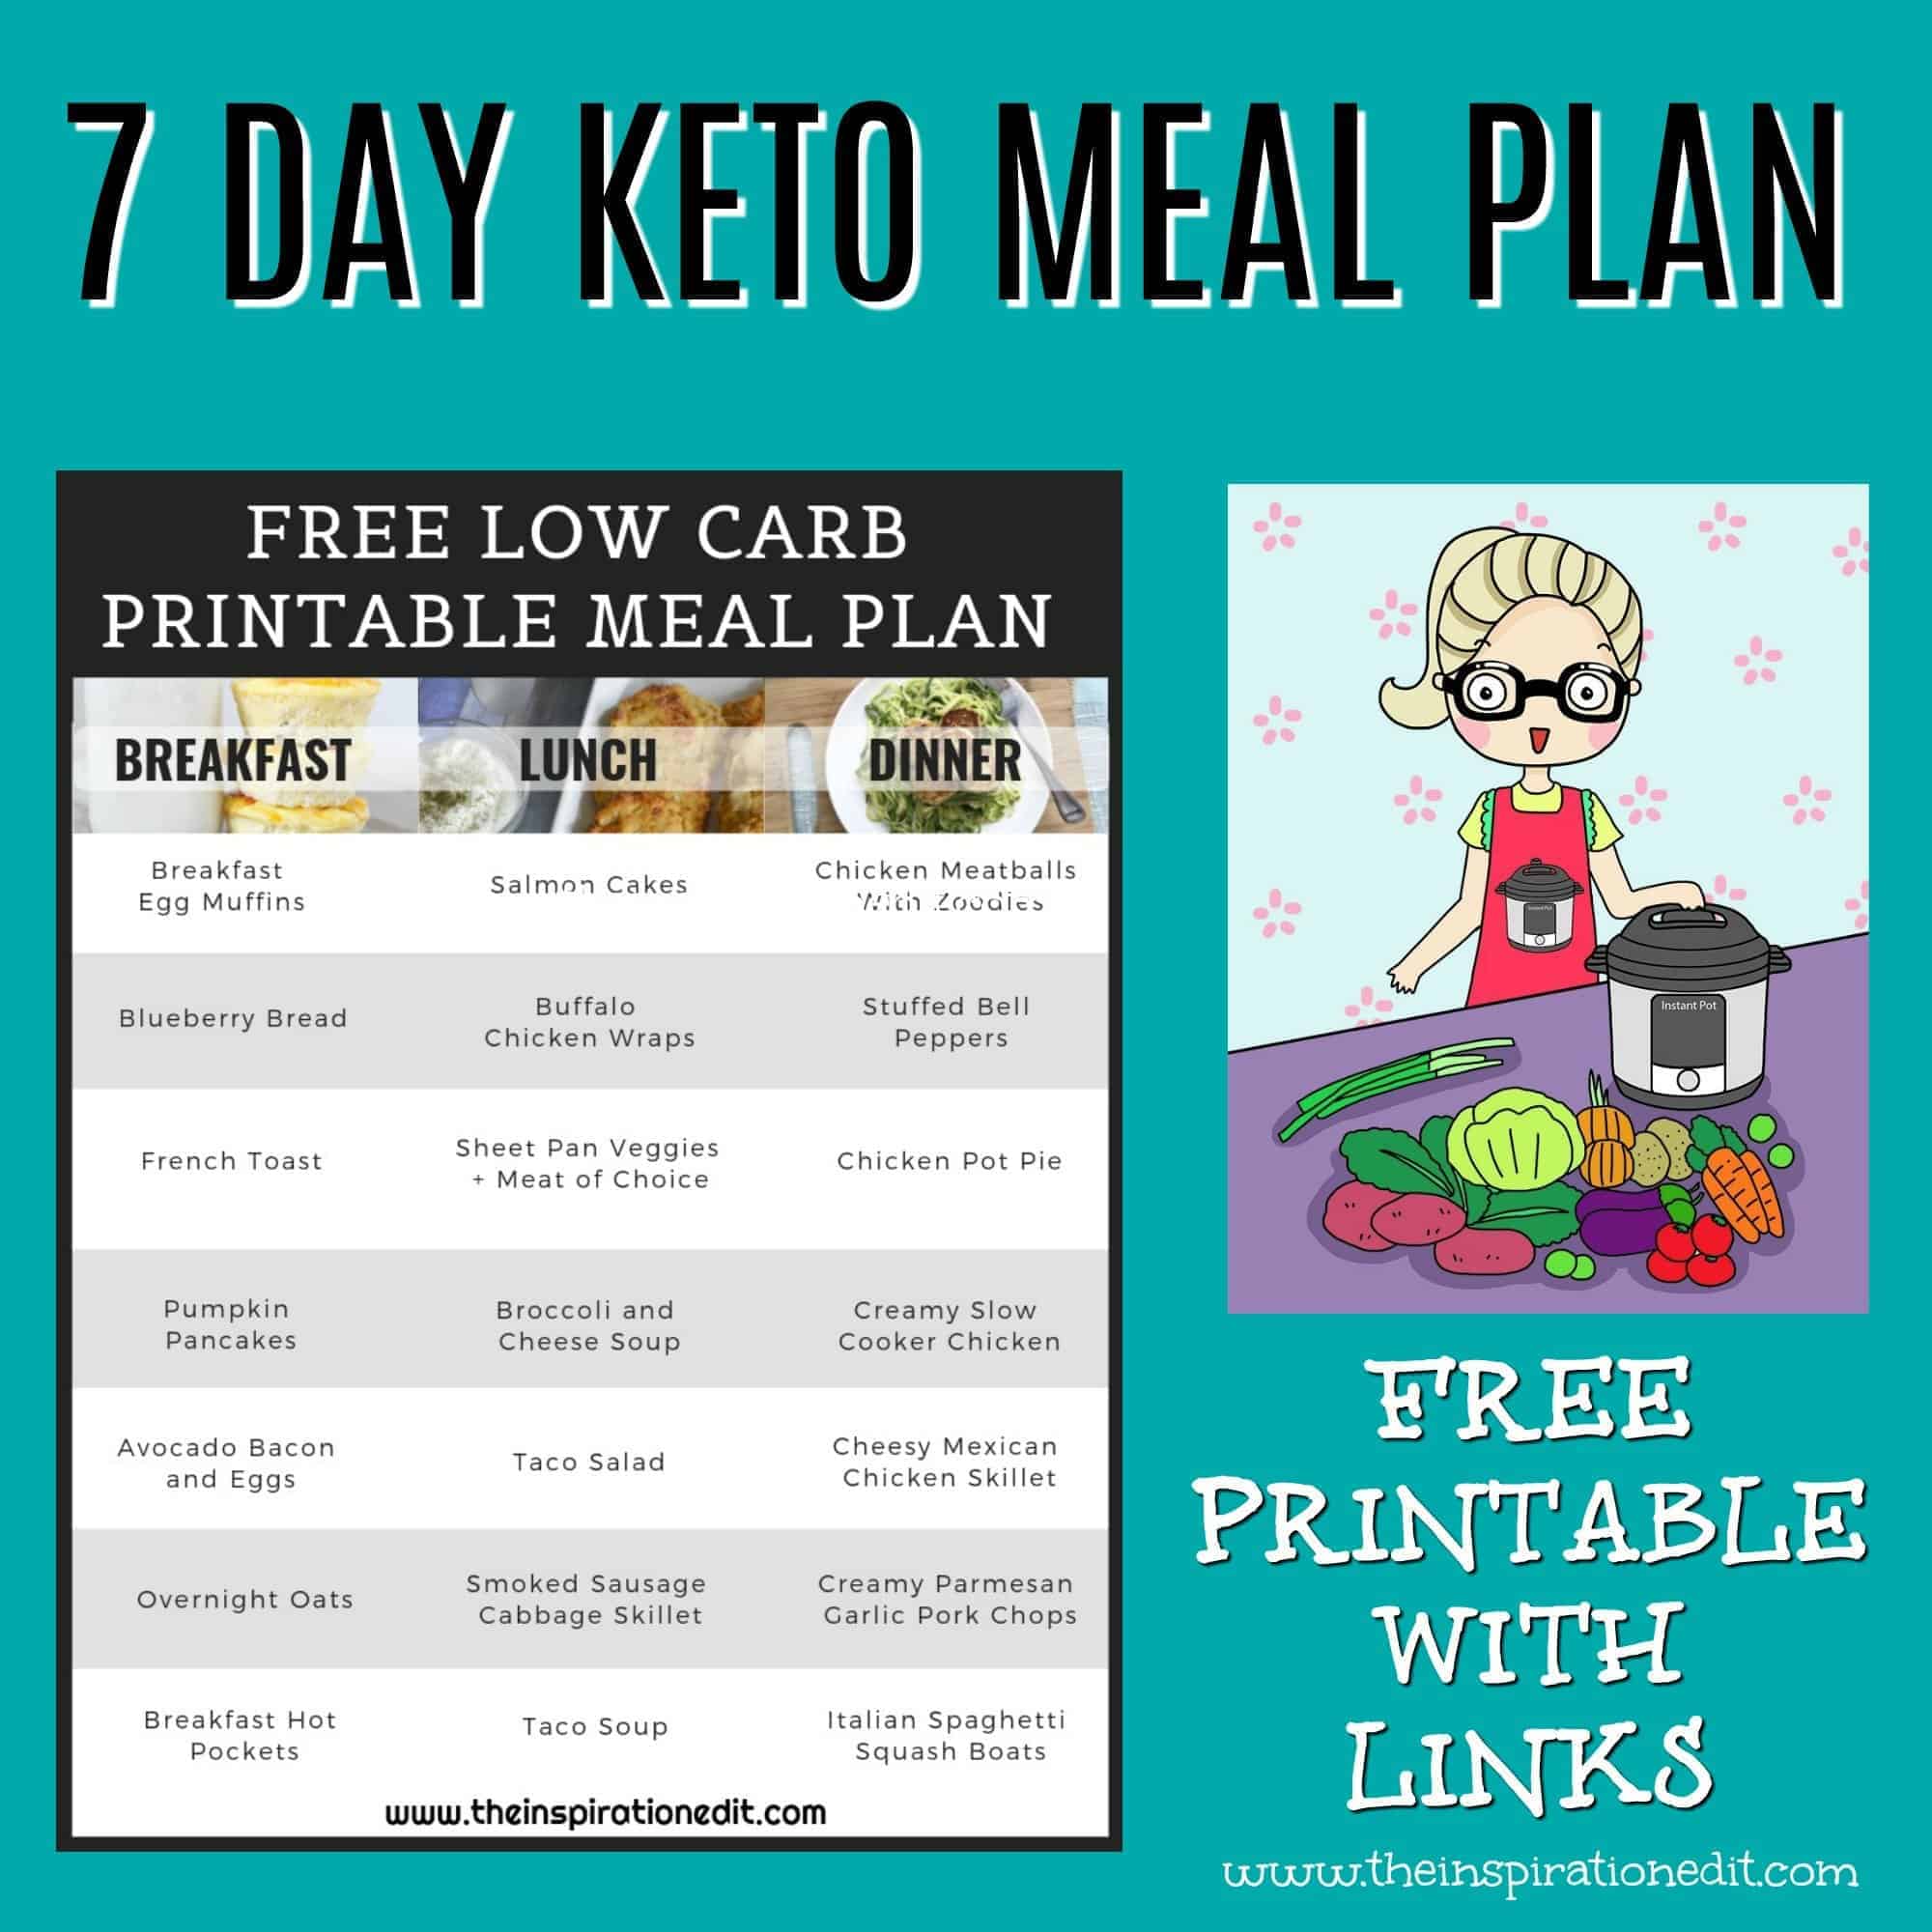 7 day keto diet free meal plan with recipes the inspiration edit